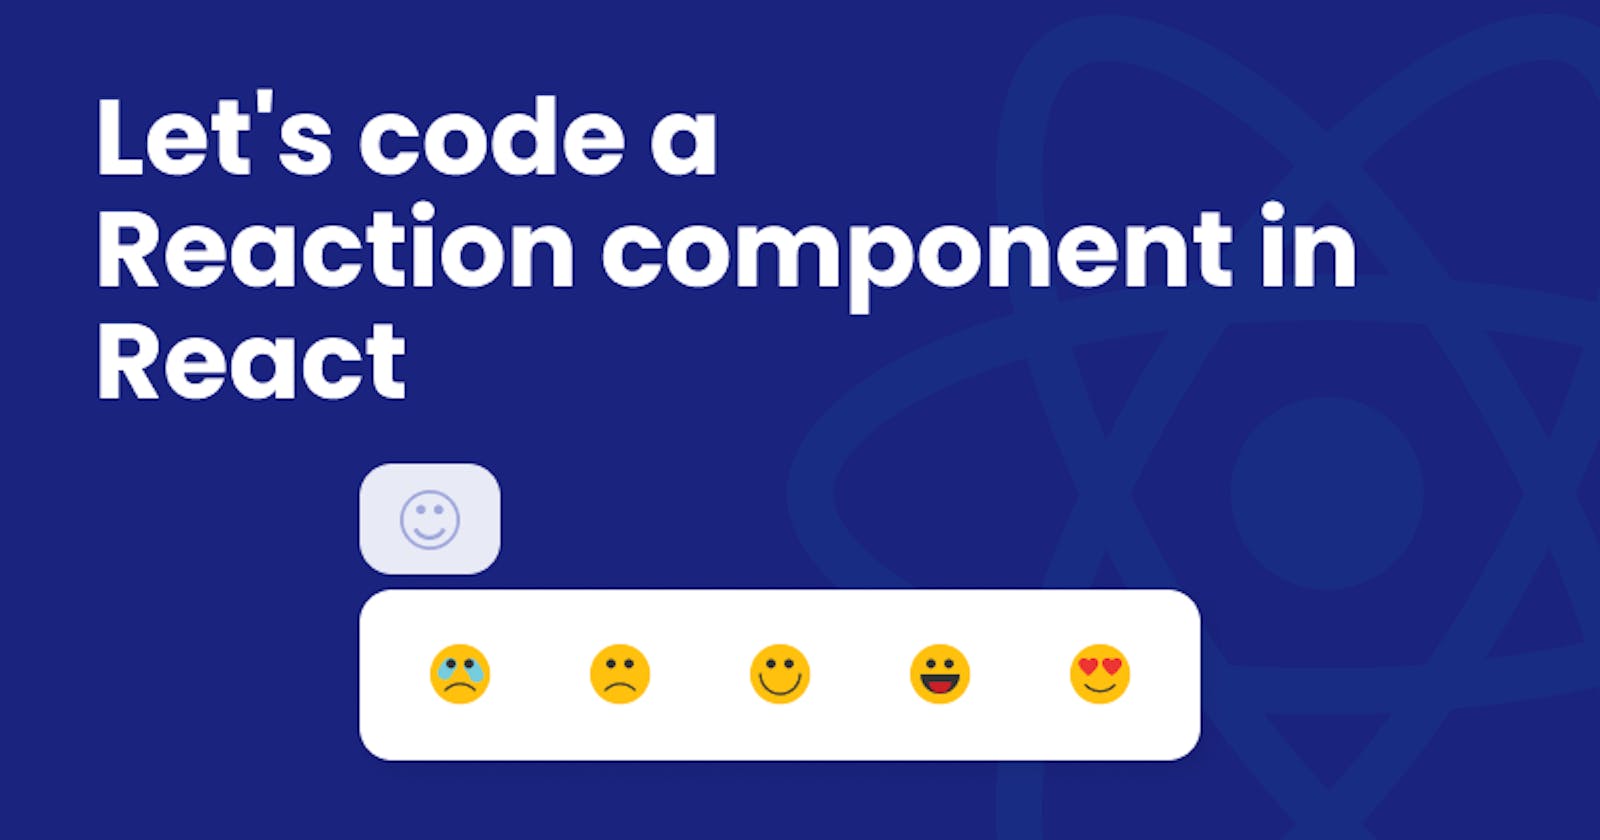 Let's code a Reaction component in React